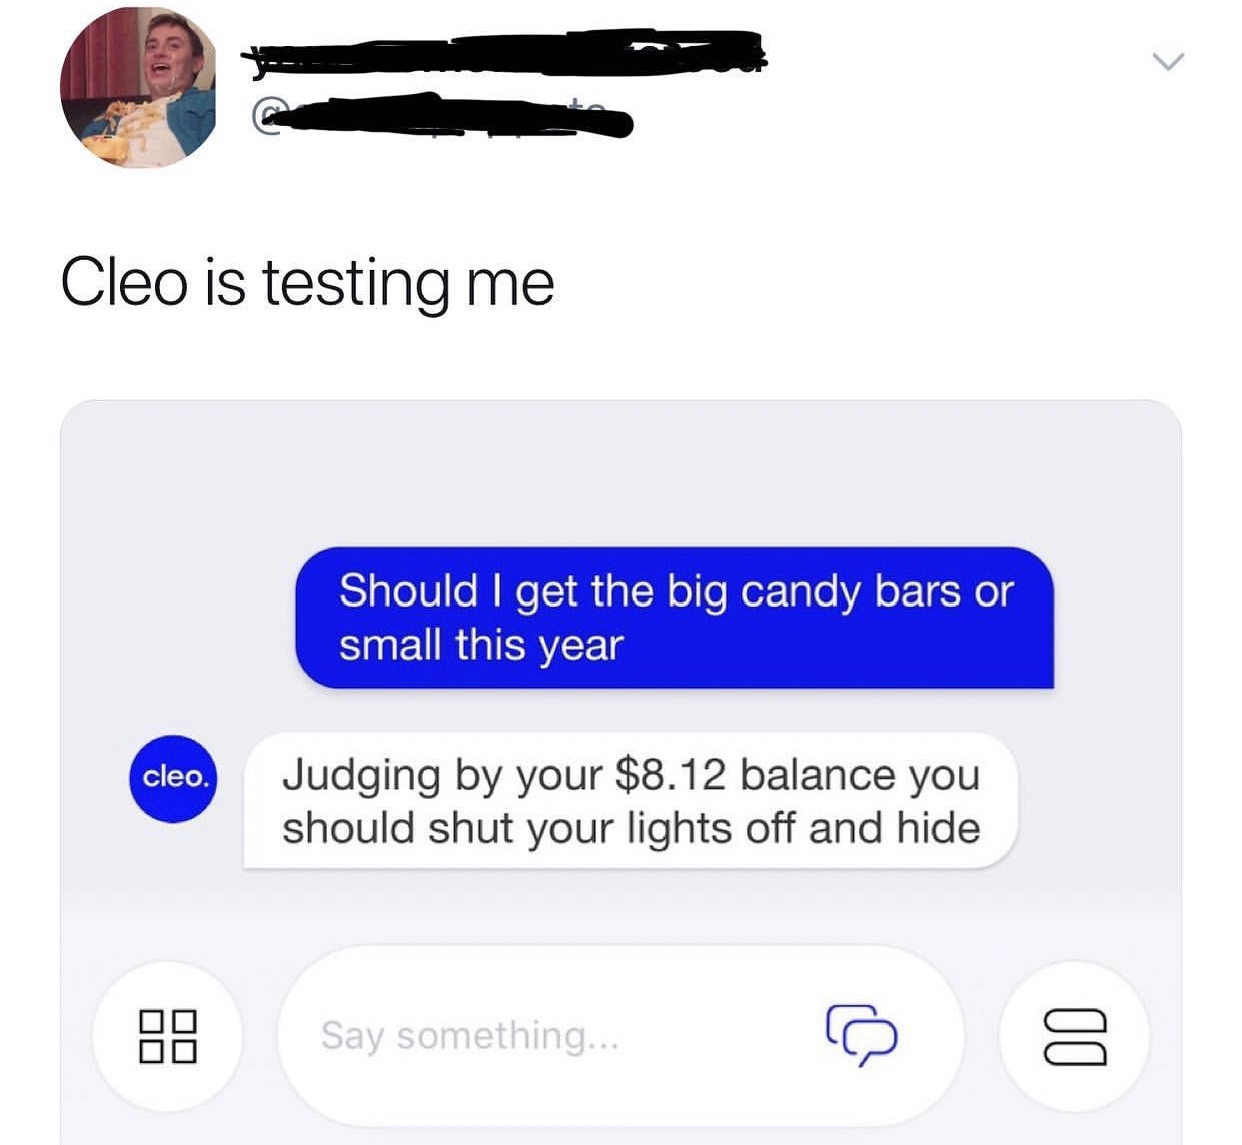 multimedia - Cleo is testing me Should I get the big candy bars or small this year cleo. Judging by your $8.12 balance you should shut your lights off and hide Say something...